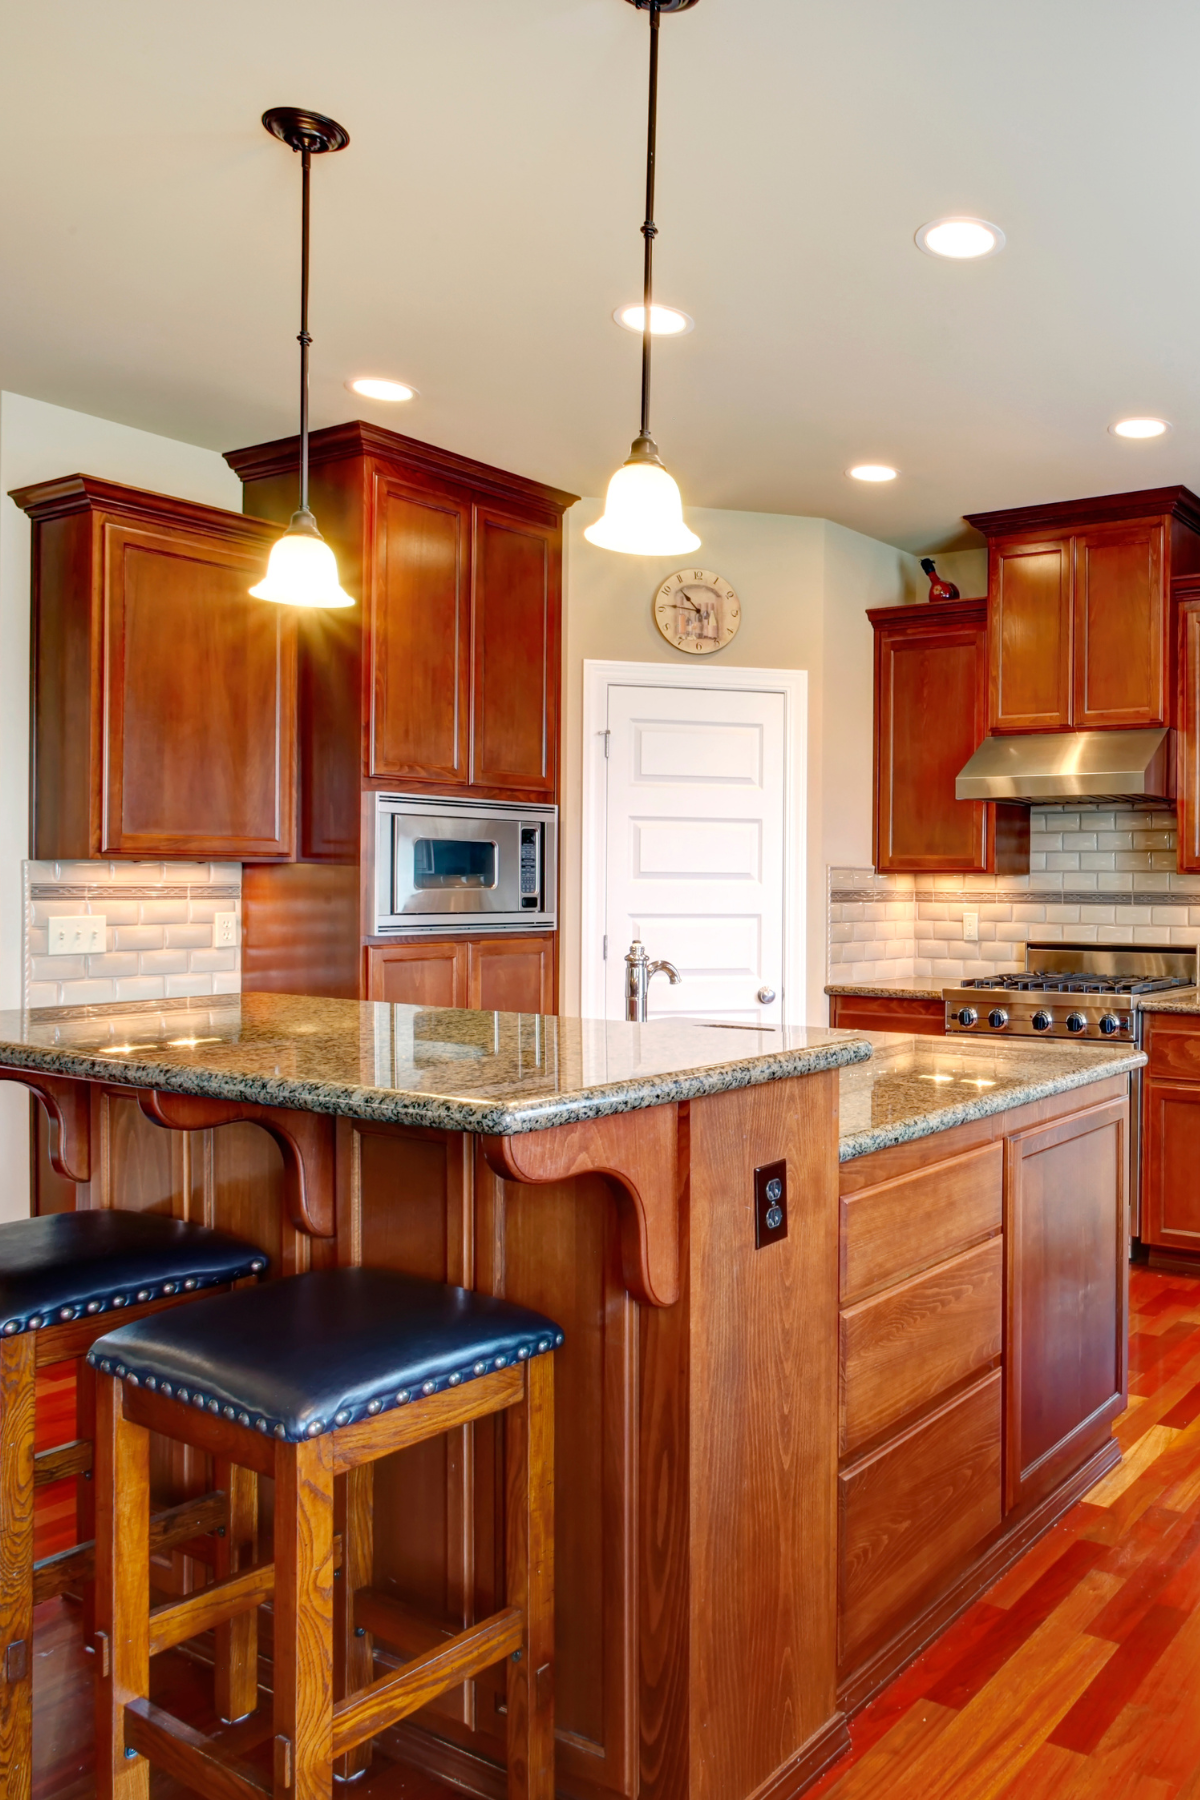 The best flooring ideas for a kitchen with oak cabinets